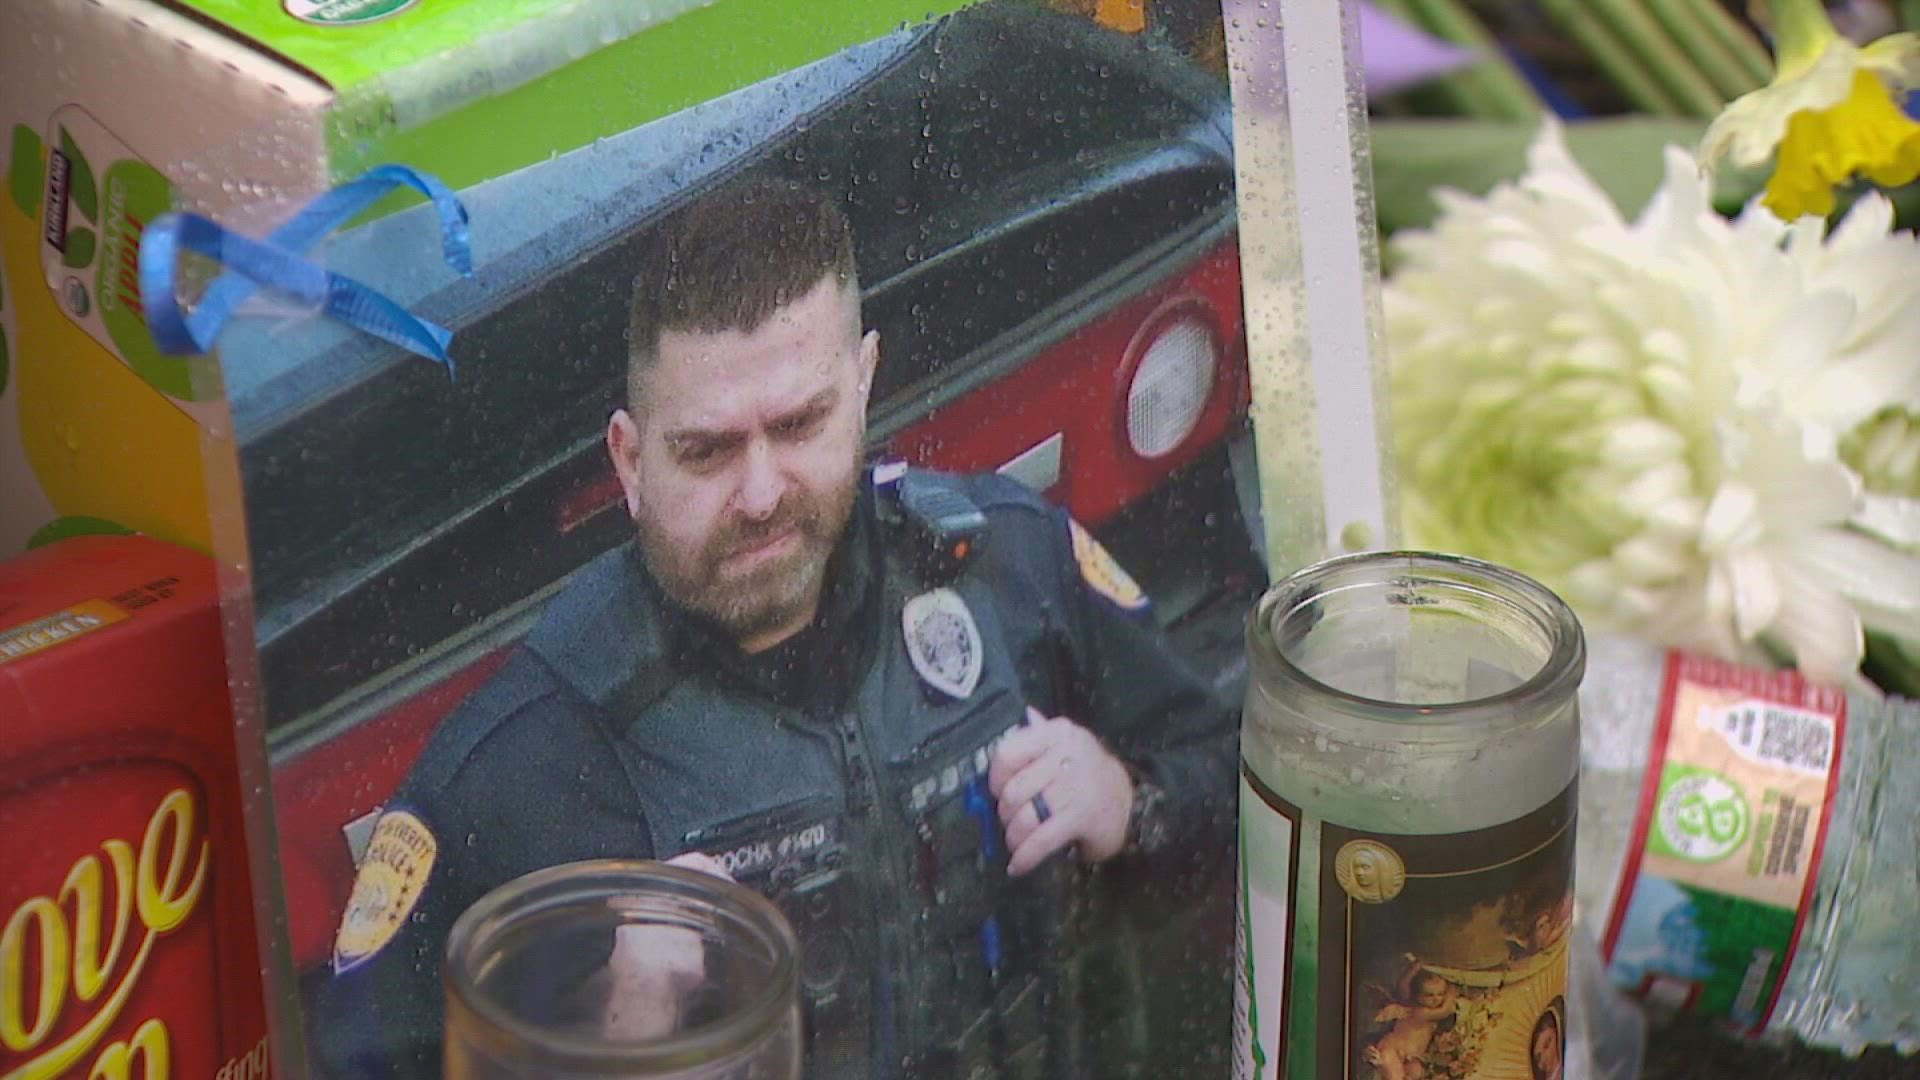 A memorial service for fallen Everett Police Officer Dan Rocha is scheduled for 1 p.m. on April 4 at Angel of the Winds Arena.